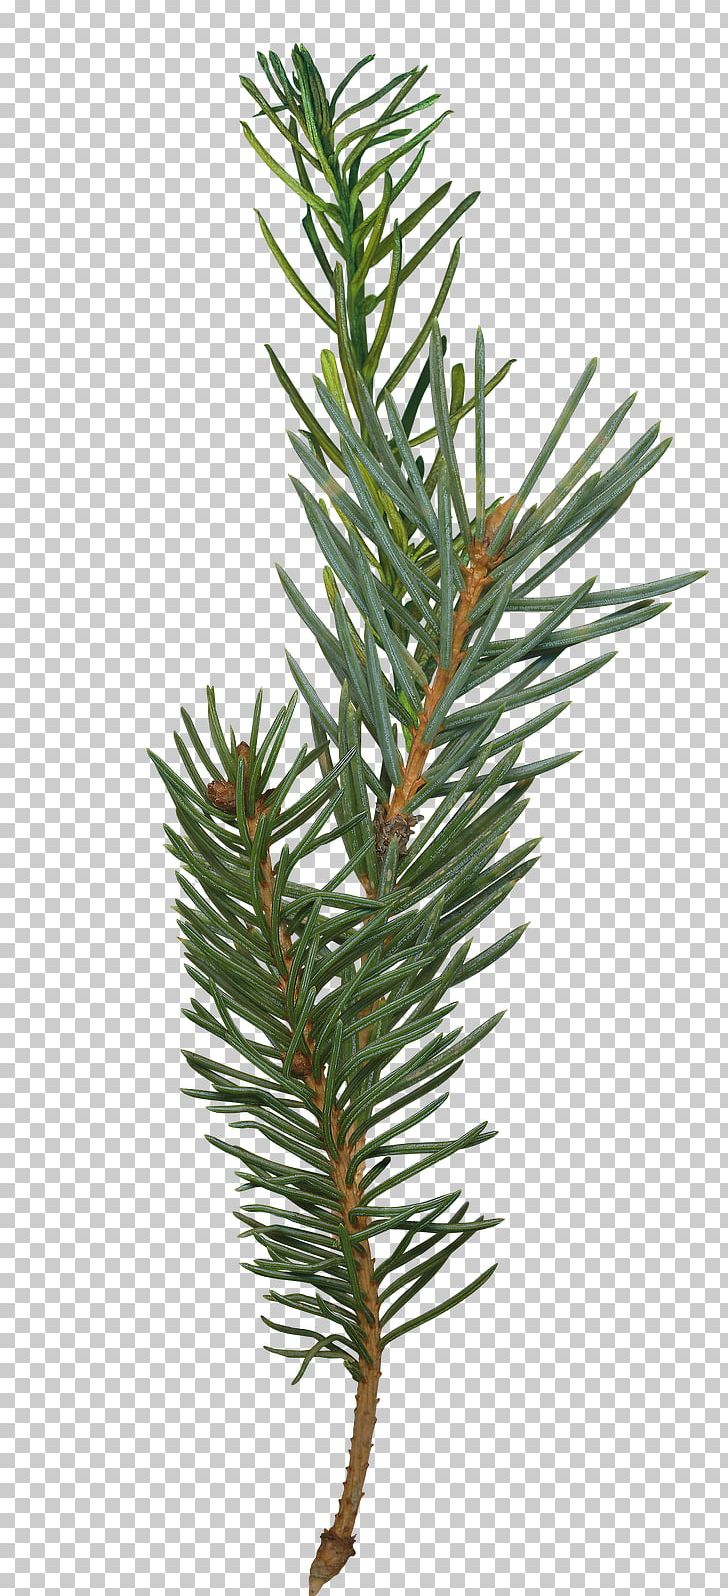 Pine Fir Branch Spruce Tree PNG, Clipart, Branch, Christmas, Conifer, Conifer Cone, Conifers Free PNG Download